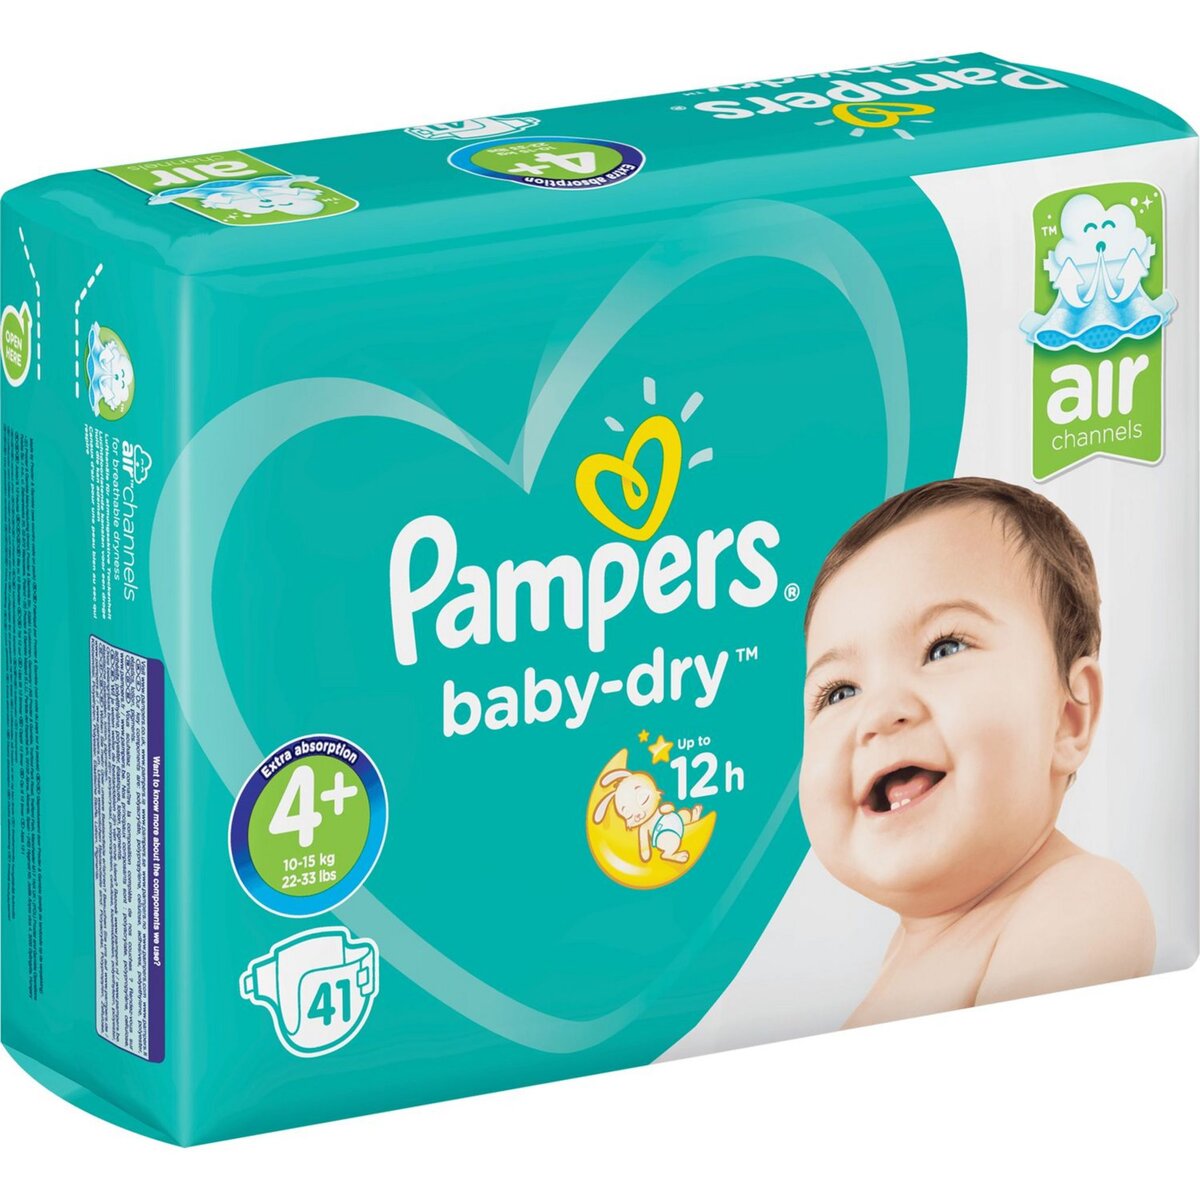 PAMPERS Baby-dry géant couches Pampers taille 7 (+15kg) 30 couches pas cher  